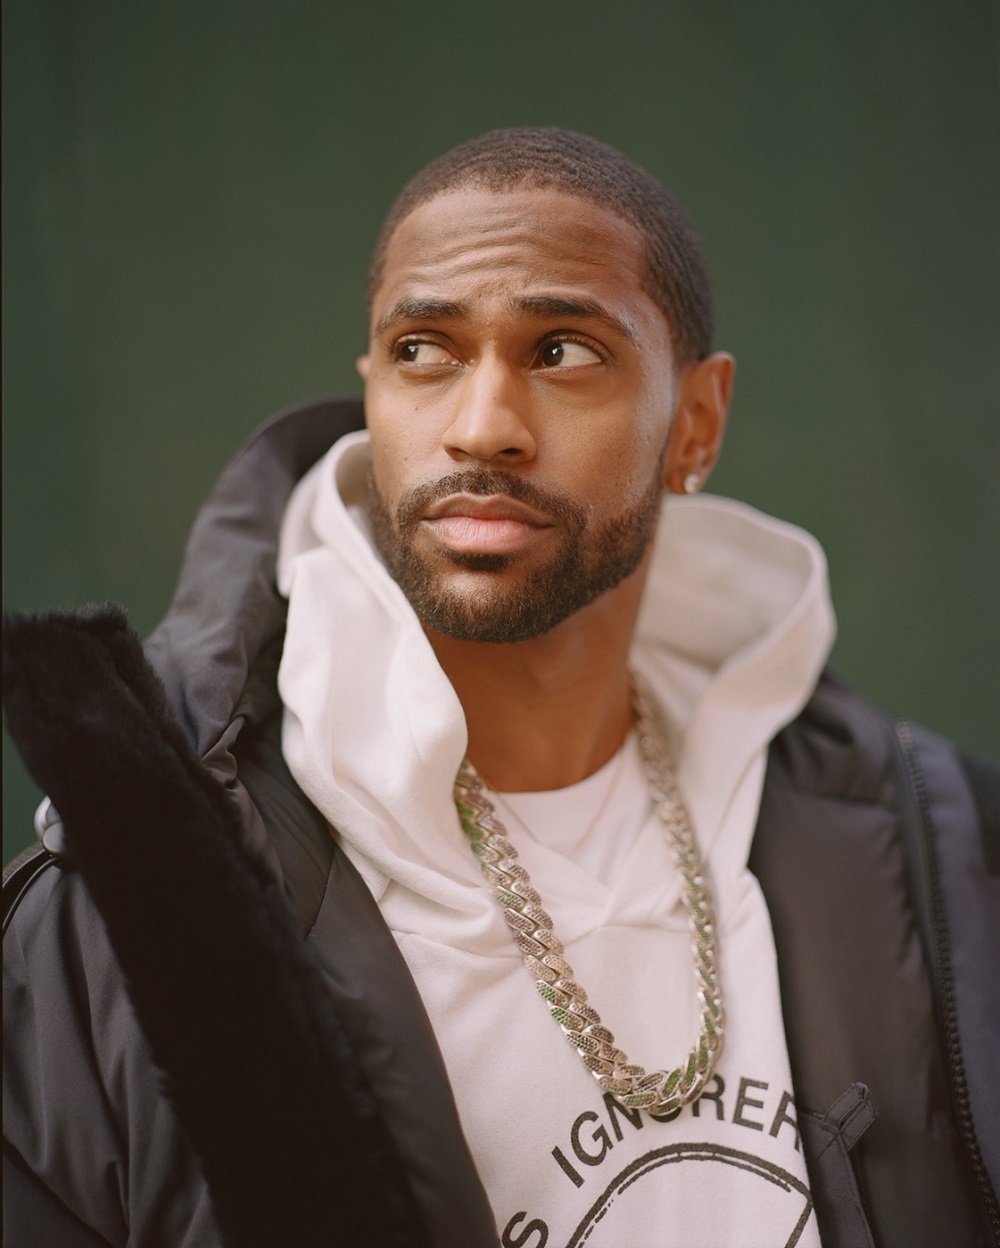 SPOTTED: Big Sean in Vetements x Canada Goose, Raf Simons and Puma